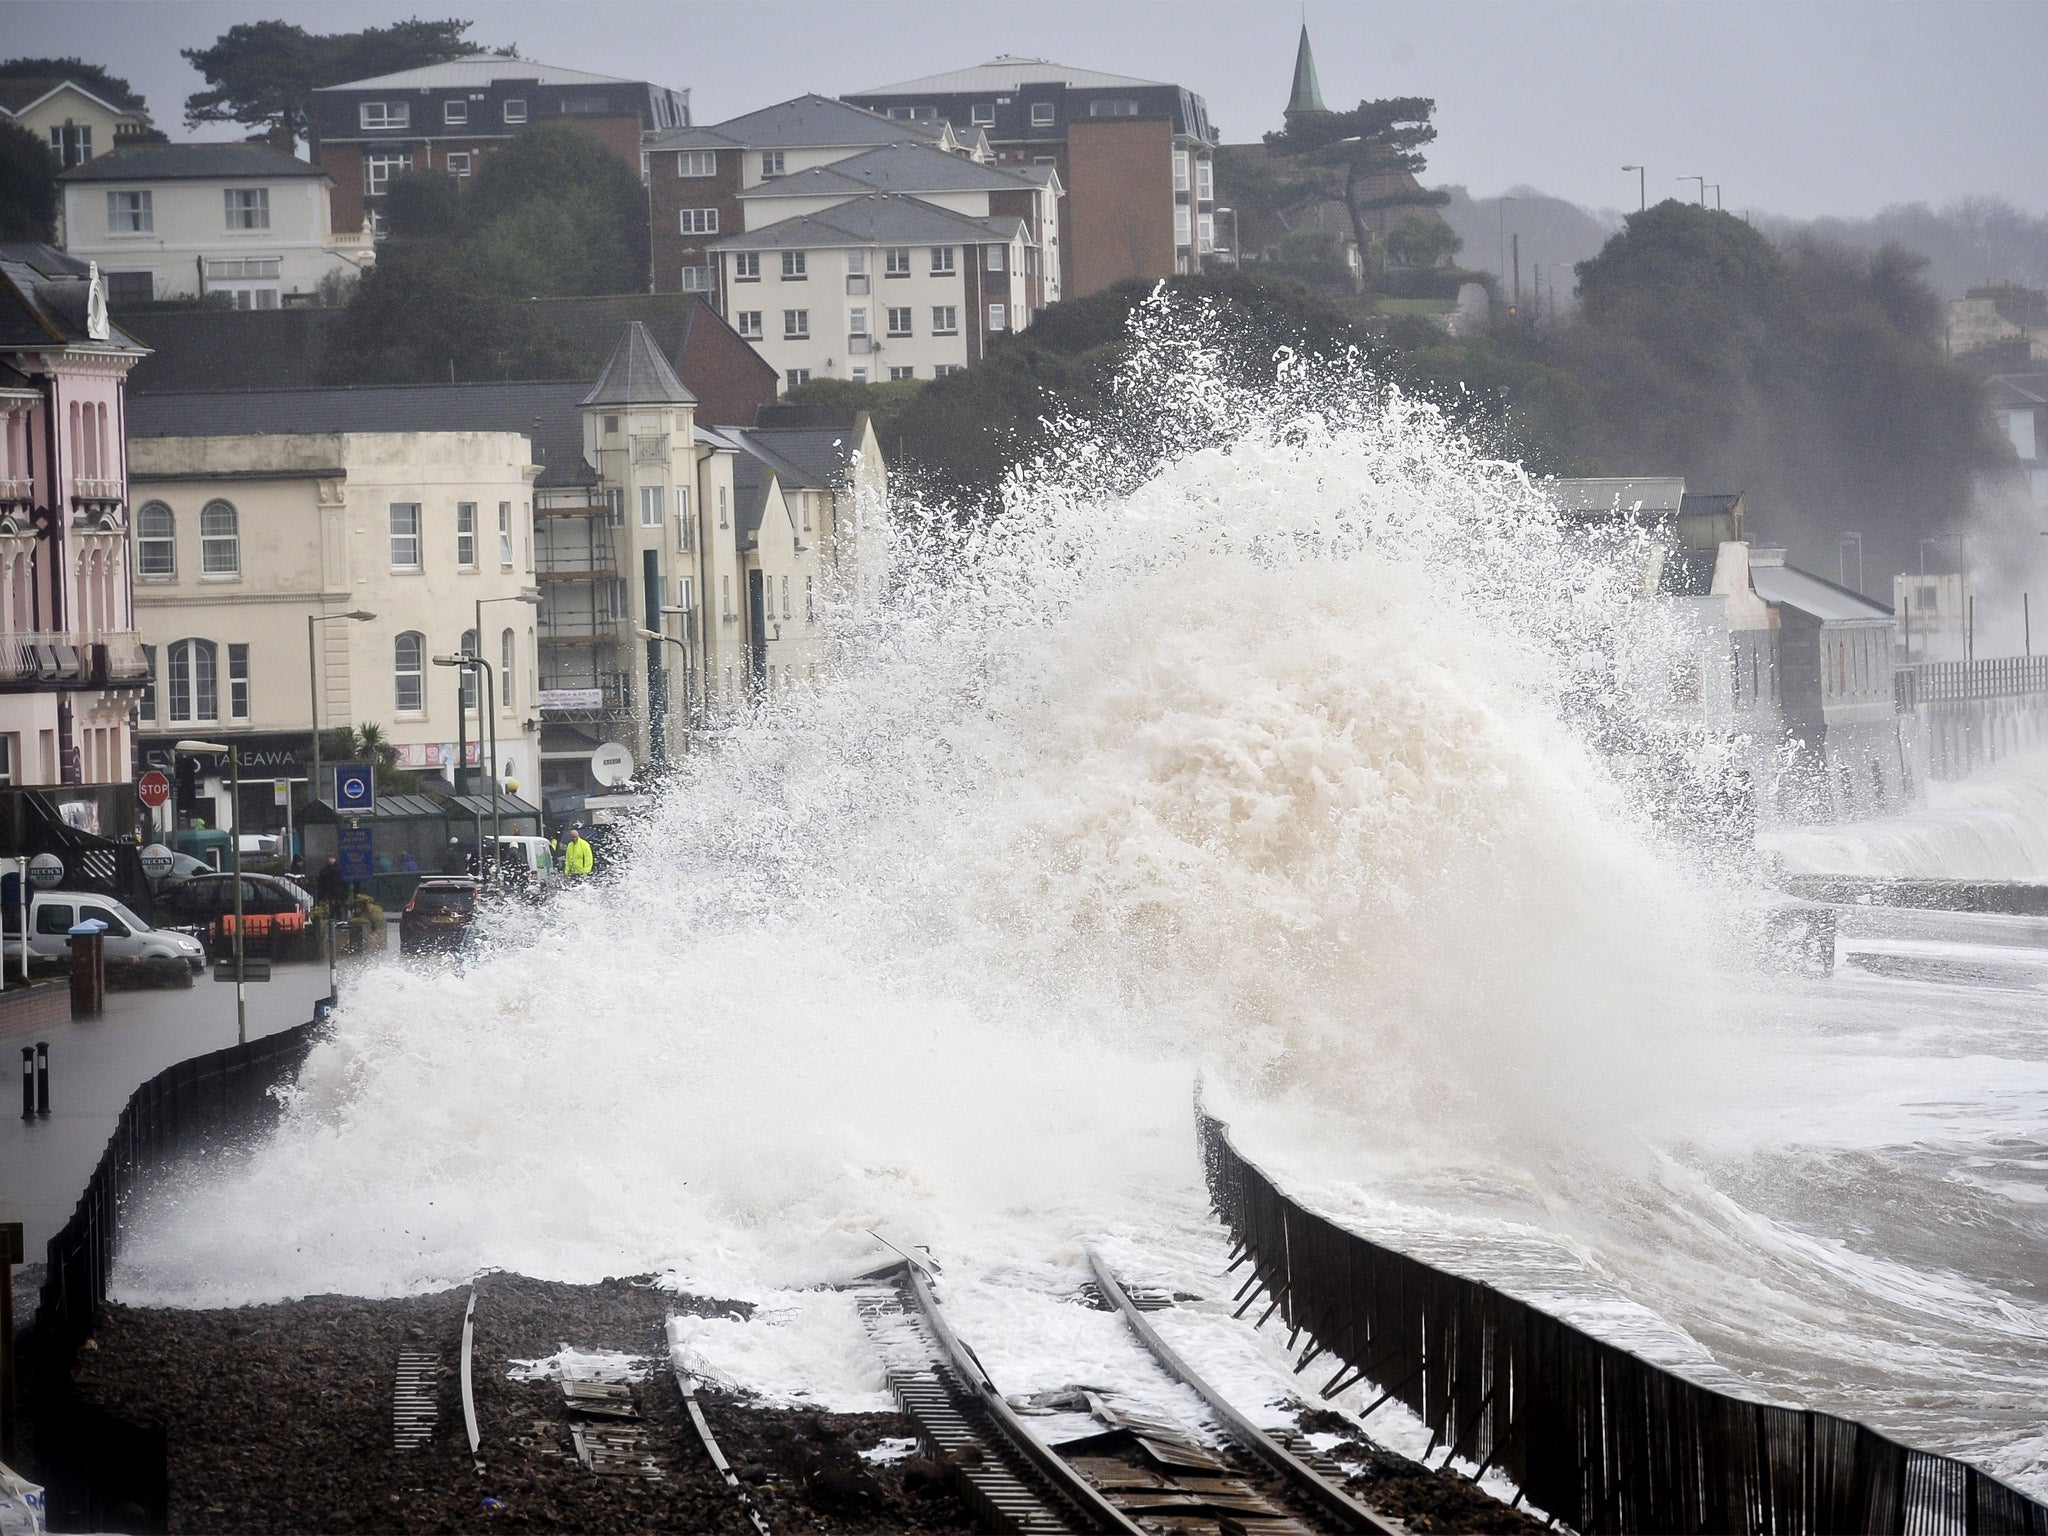 A huge waves break over the railway in Dawlish, causing damage